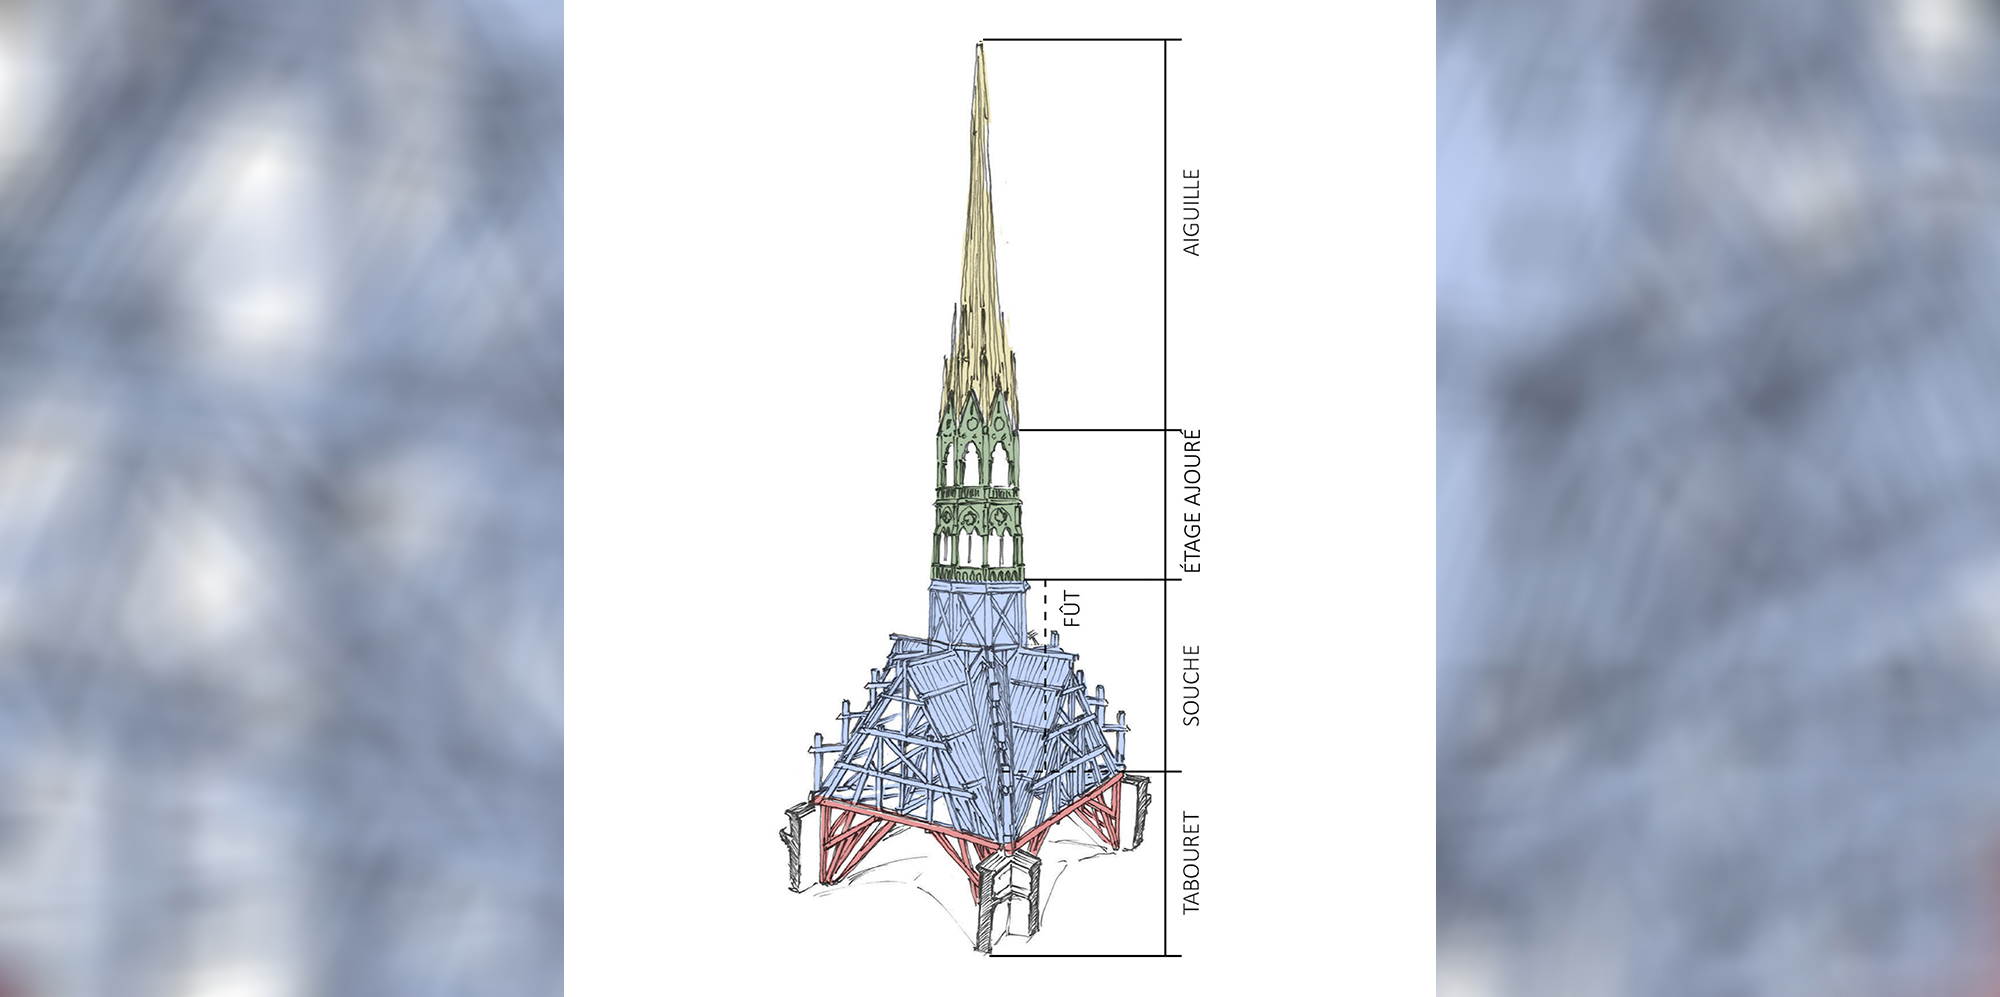 PHOTO: Sketch of the elements composing the steeple.